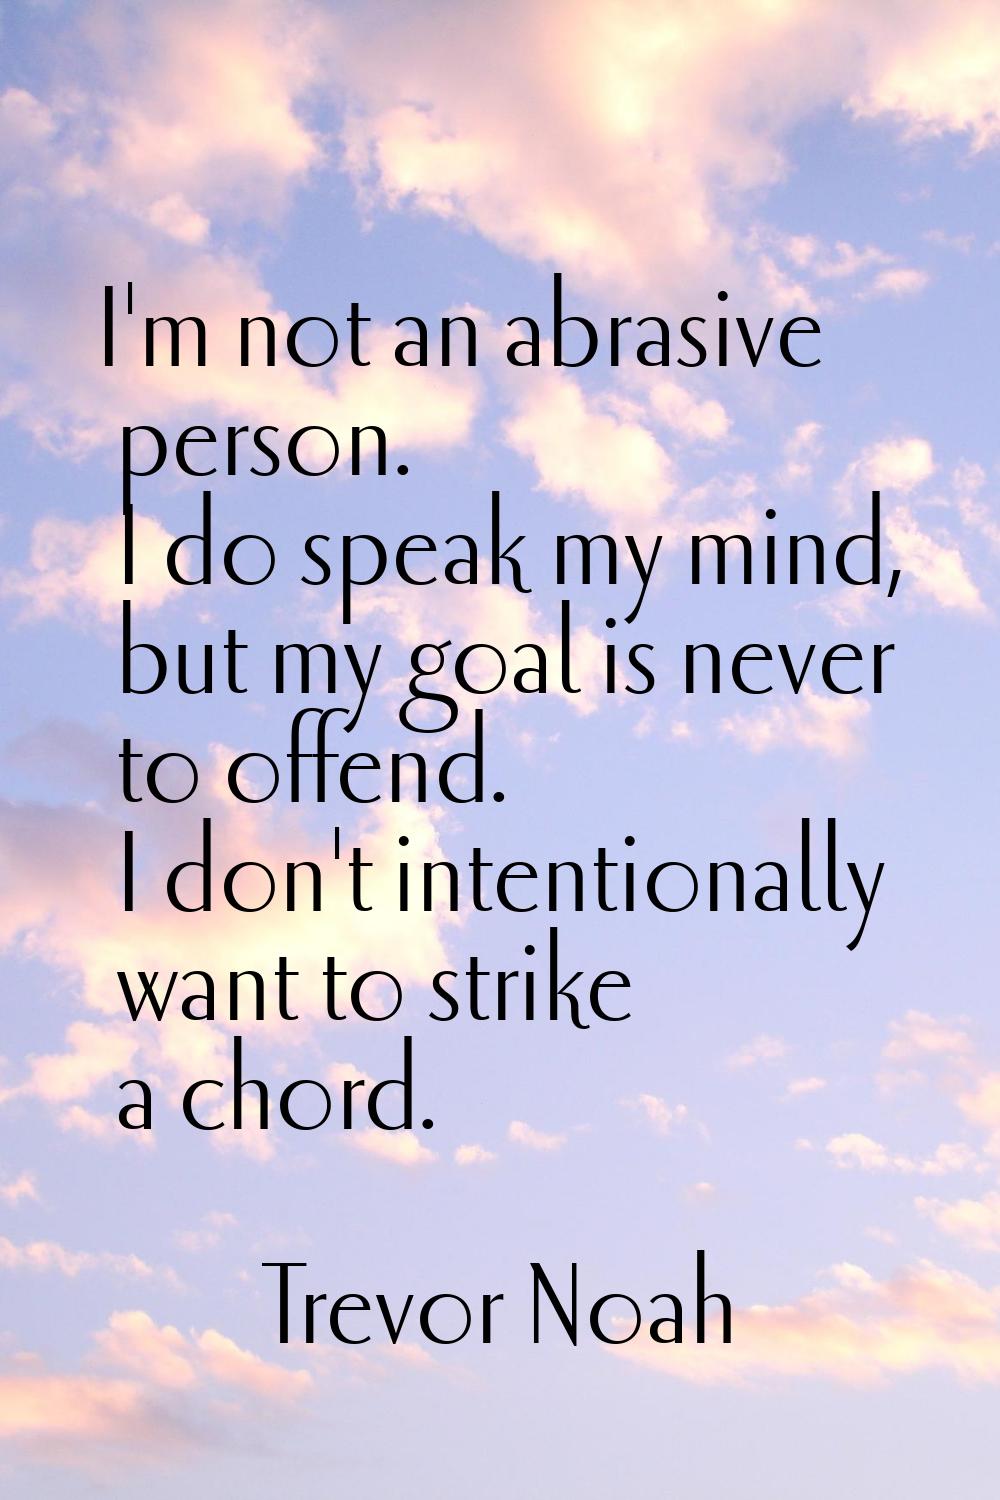 I'm not an abrasive person. I do speak my mind, but my goal is never to offend. I don't intentional